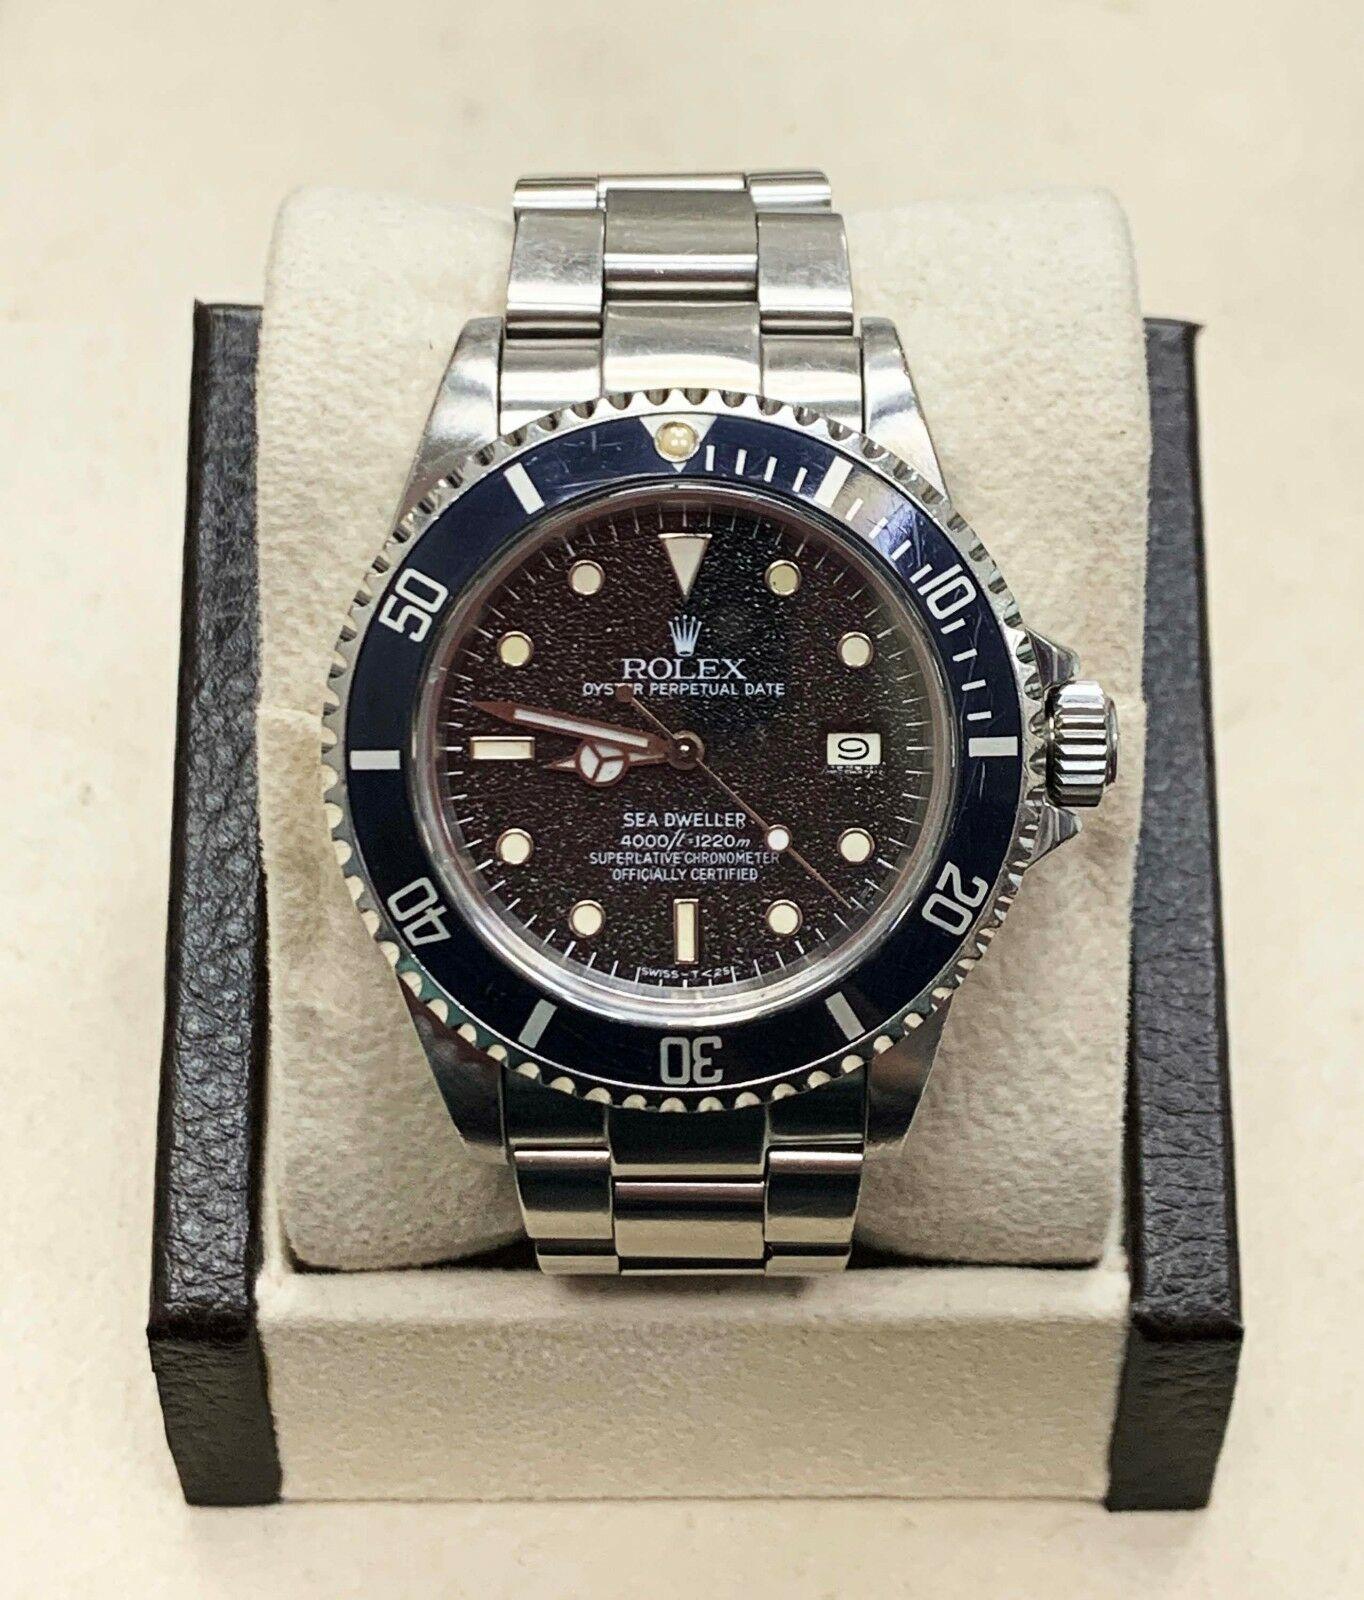 Style Number: 16660
Serial: 8057***
Year: 1984
Model: Sea- Dweller 
Case Material: Stainless Steel 
Band: Stainless Steel 
Bezel: Black
Dial: Black- Very Rare Dial
Face: Sapphire Crystal 
Case Size: 40mm

Includes: 
-Elegant Watch Box
-Certified